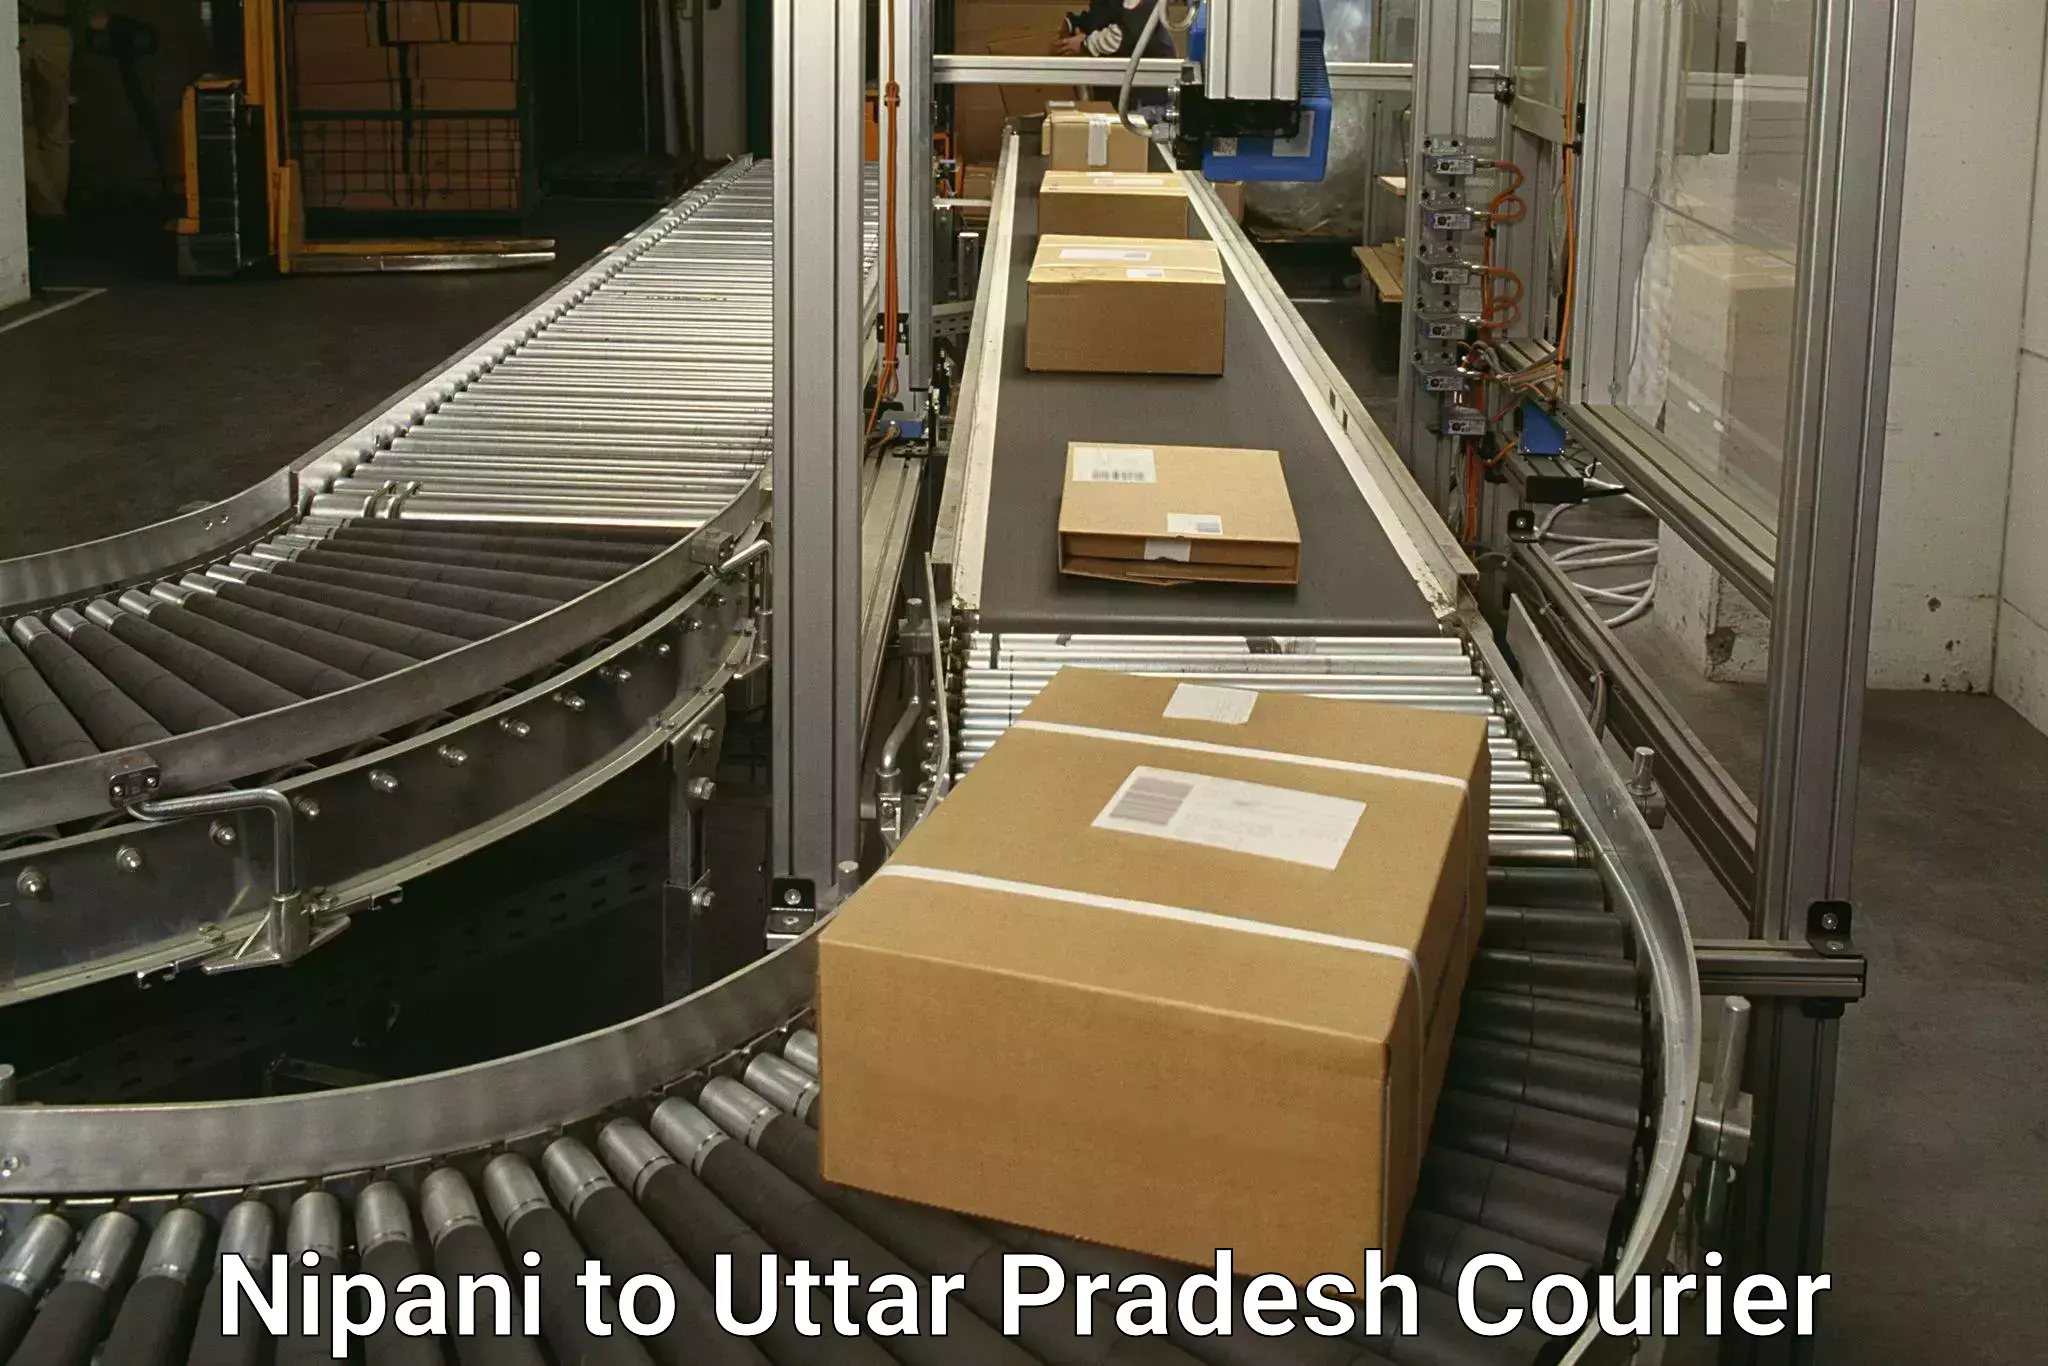 Parcel service for businesses Nipani to Sultanpur